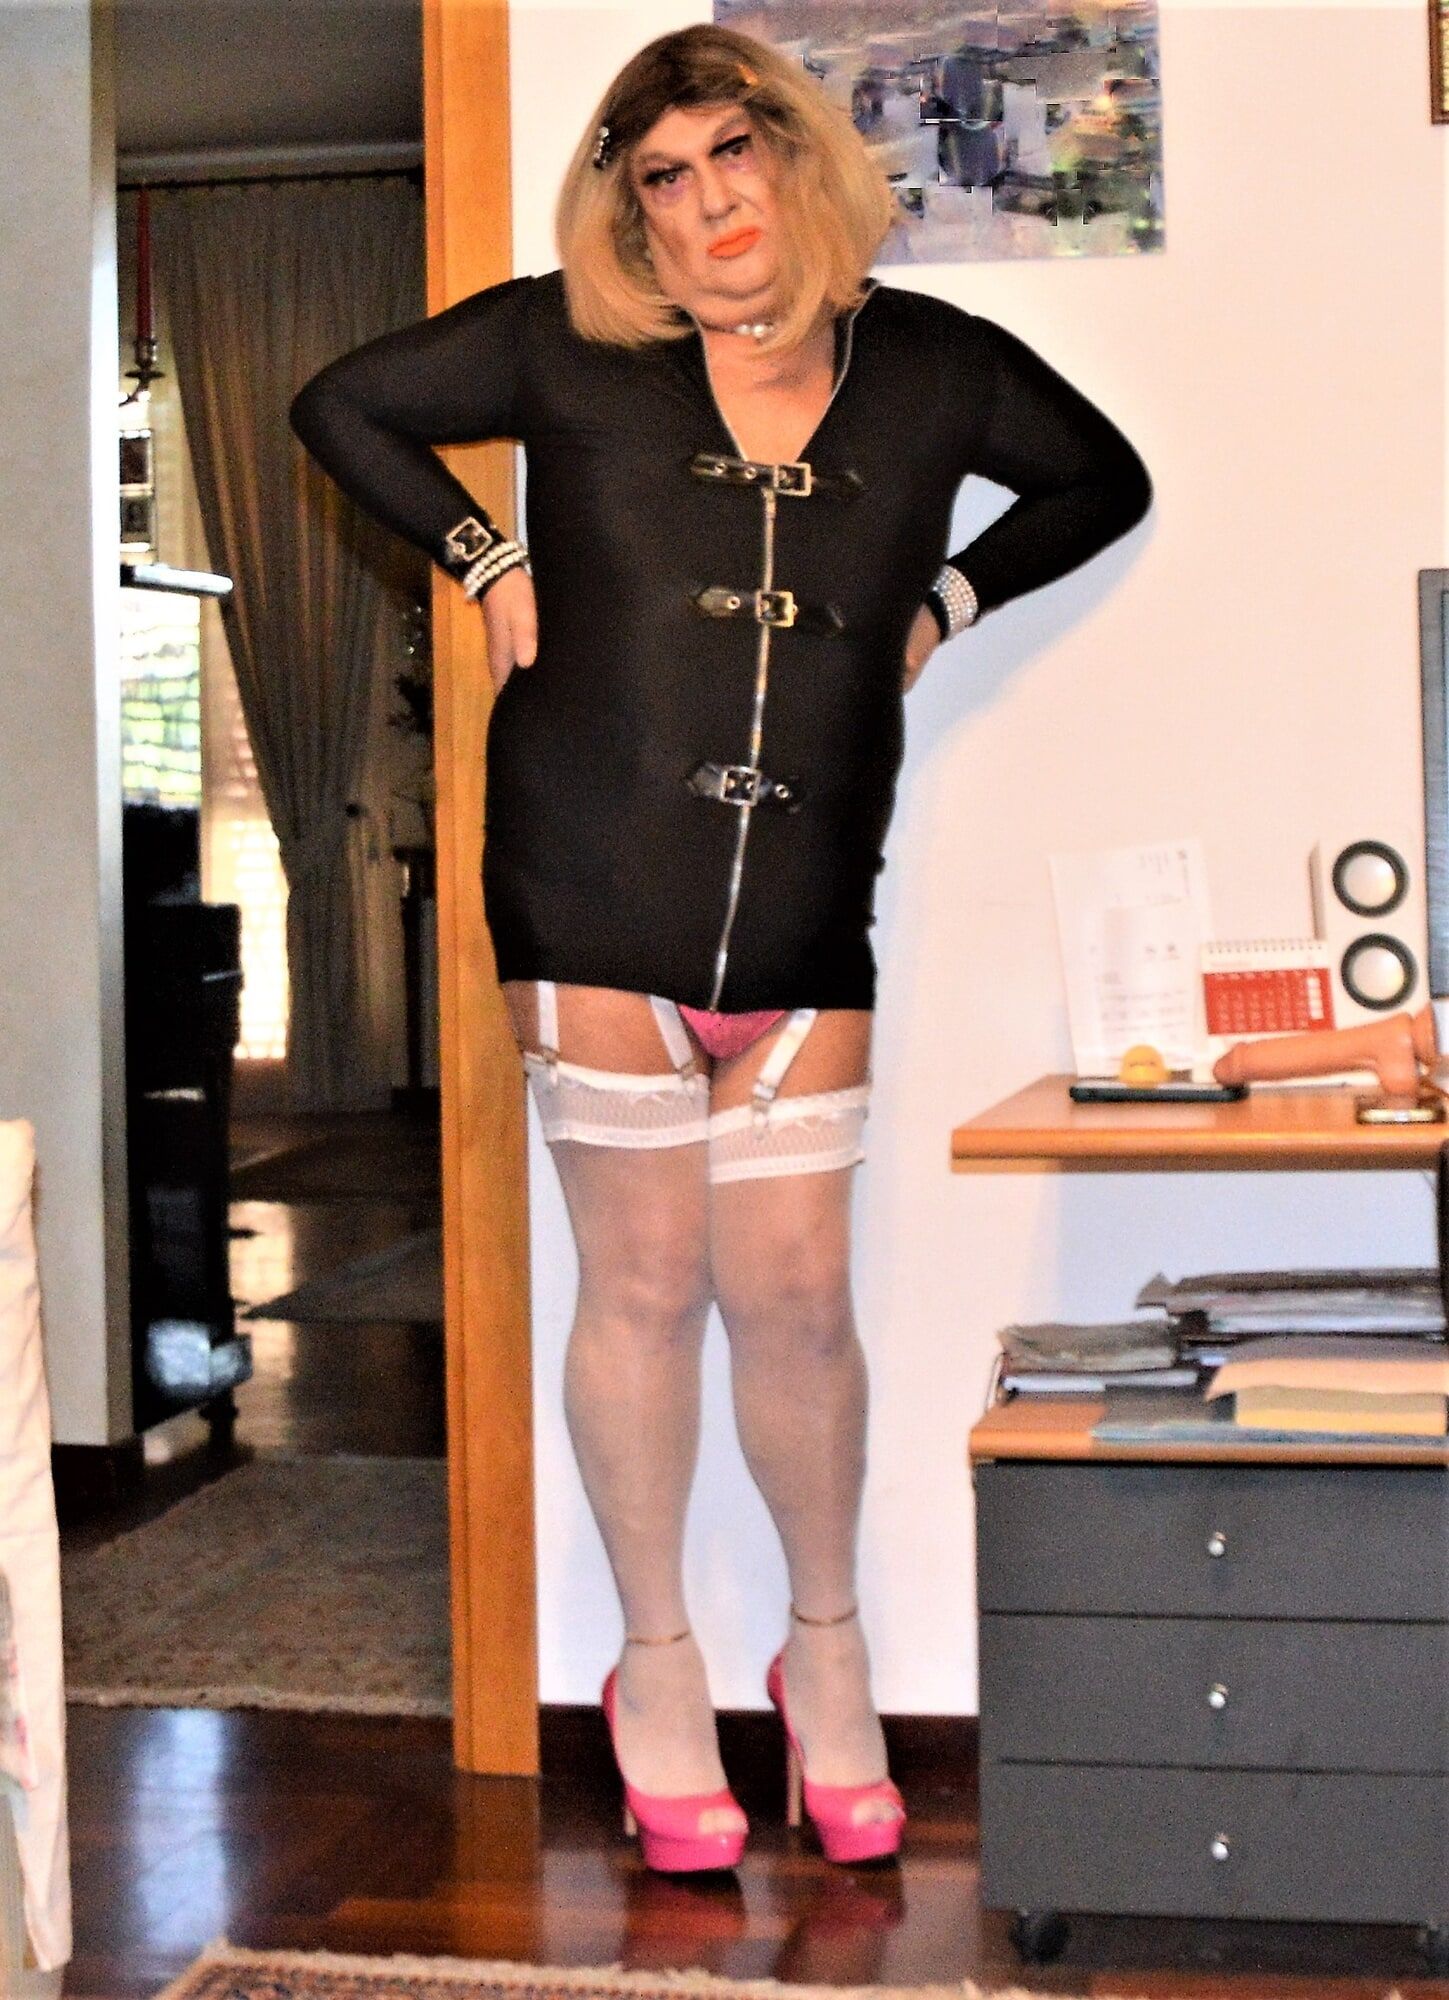 the latest photos of a dirty sissy